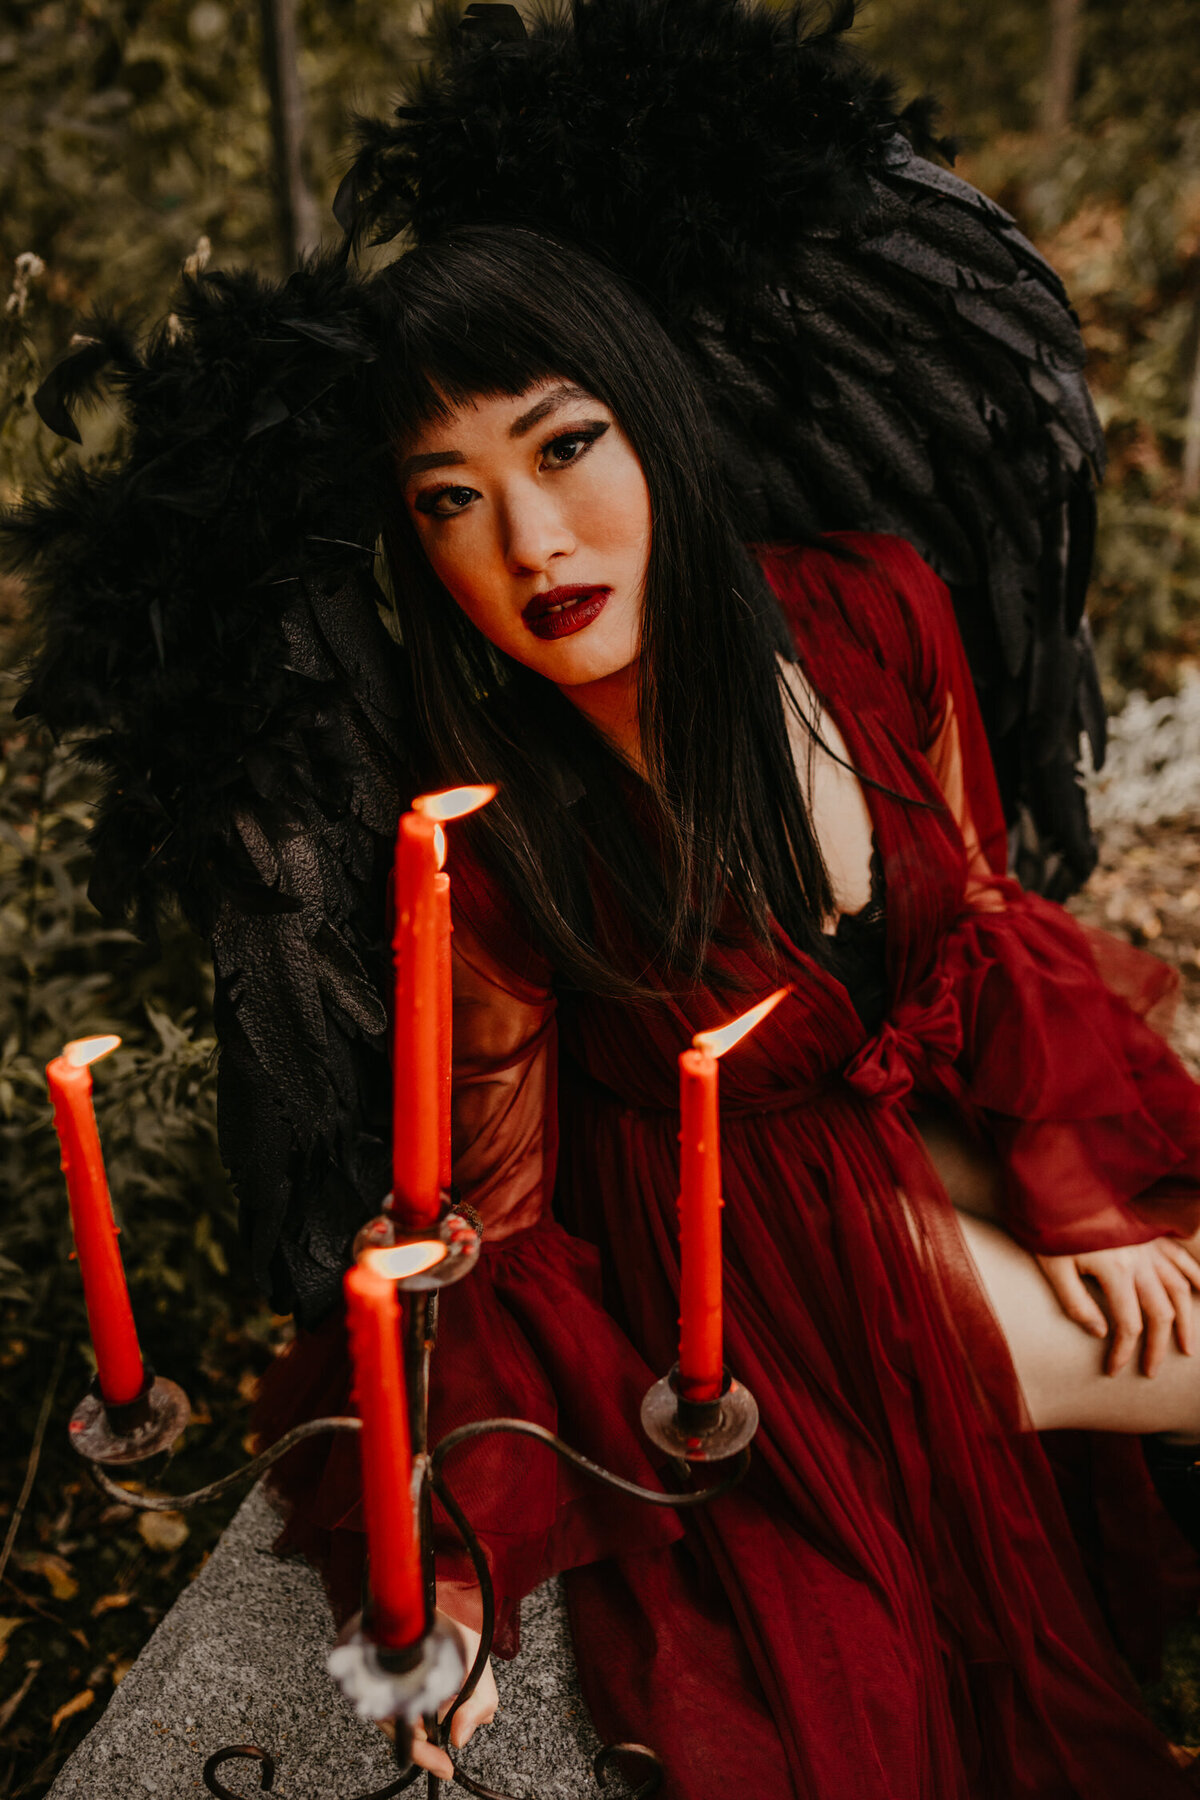 Connie-Chen-Fallen-Angels-Goddess-Minis-Ruby-Jean-Photography-7